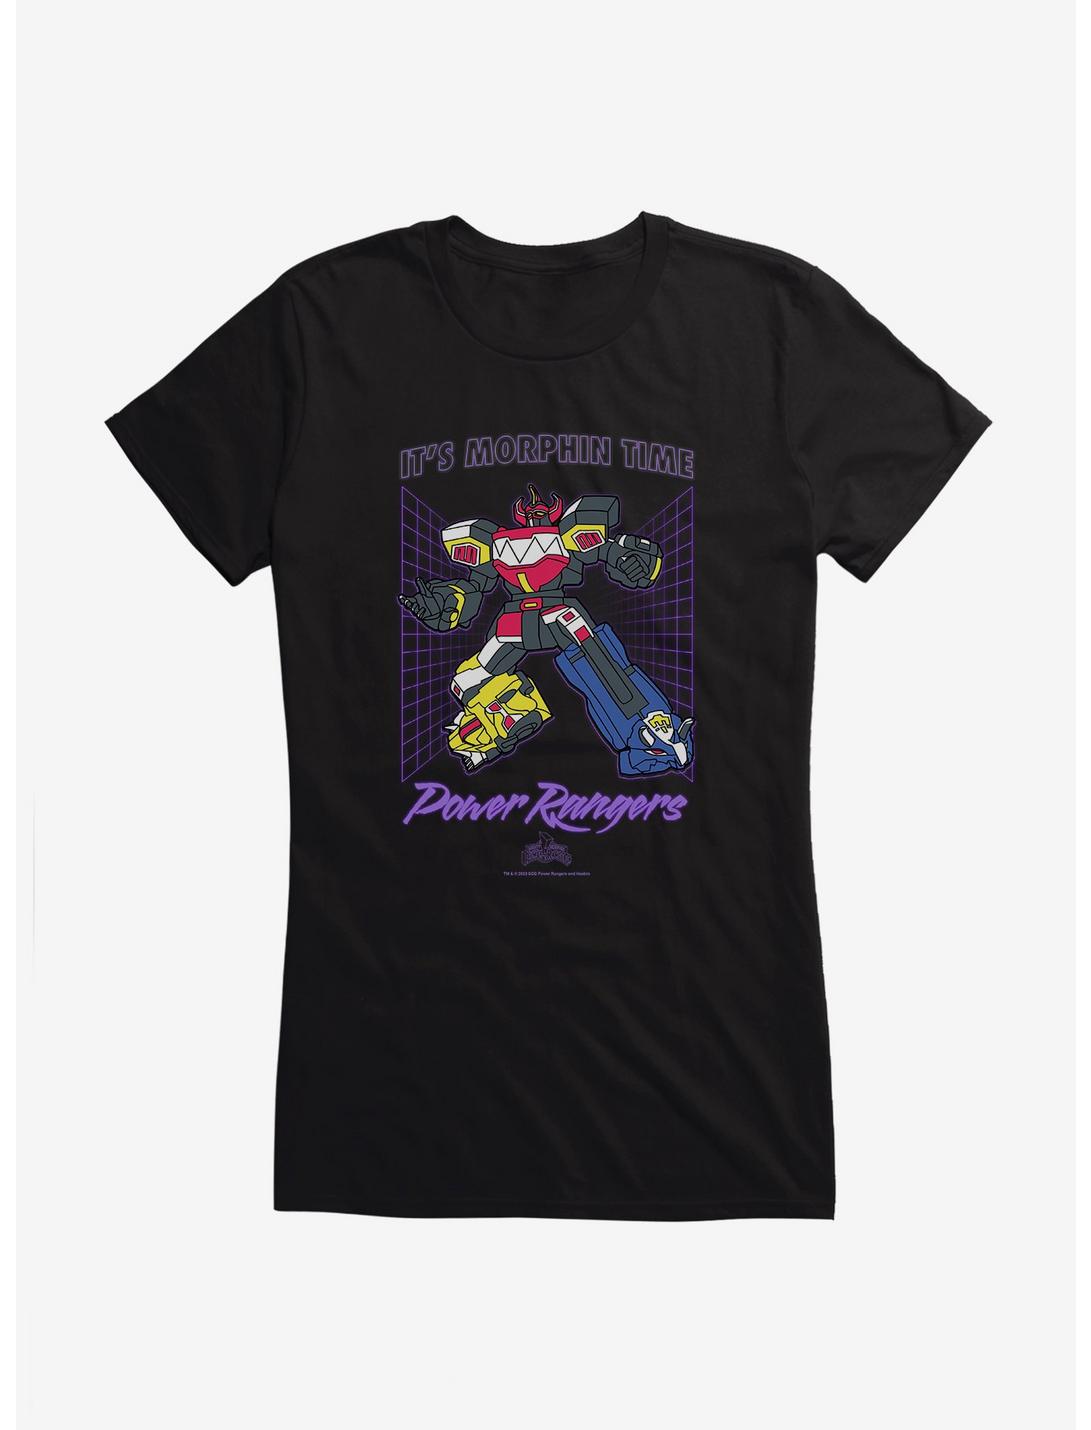 Mighty Morphin Power Rangers It's Morphin Time Alpha 5 Girls T-Shirt, , hi-res